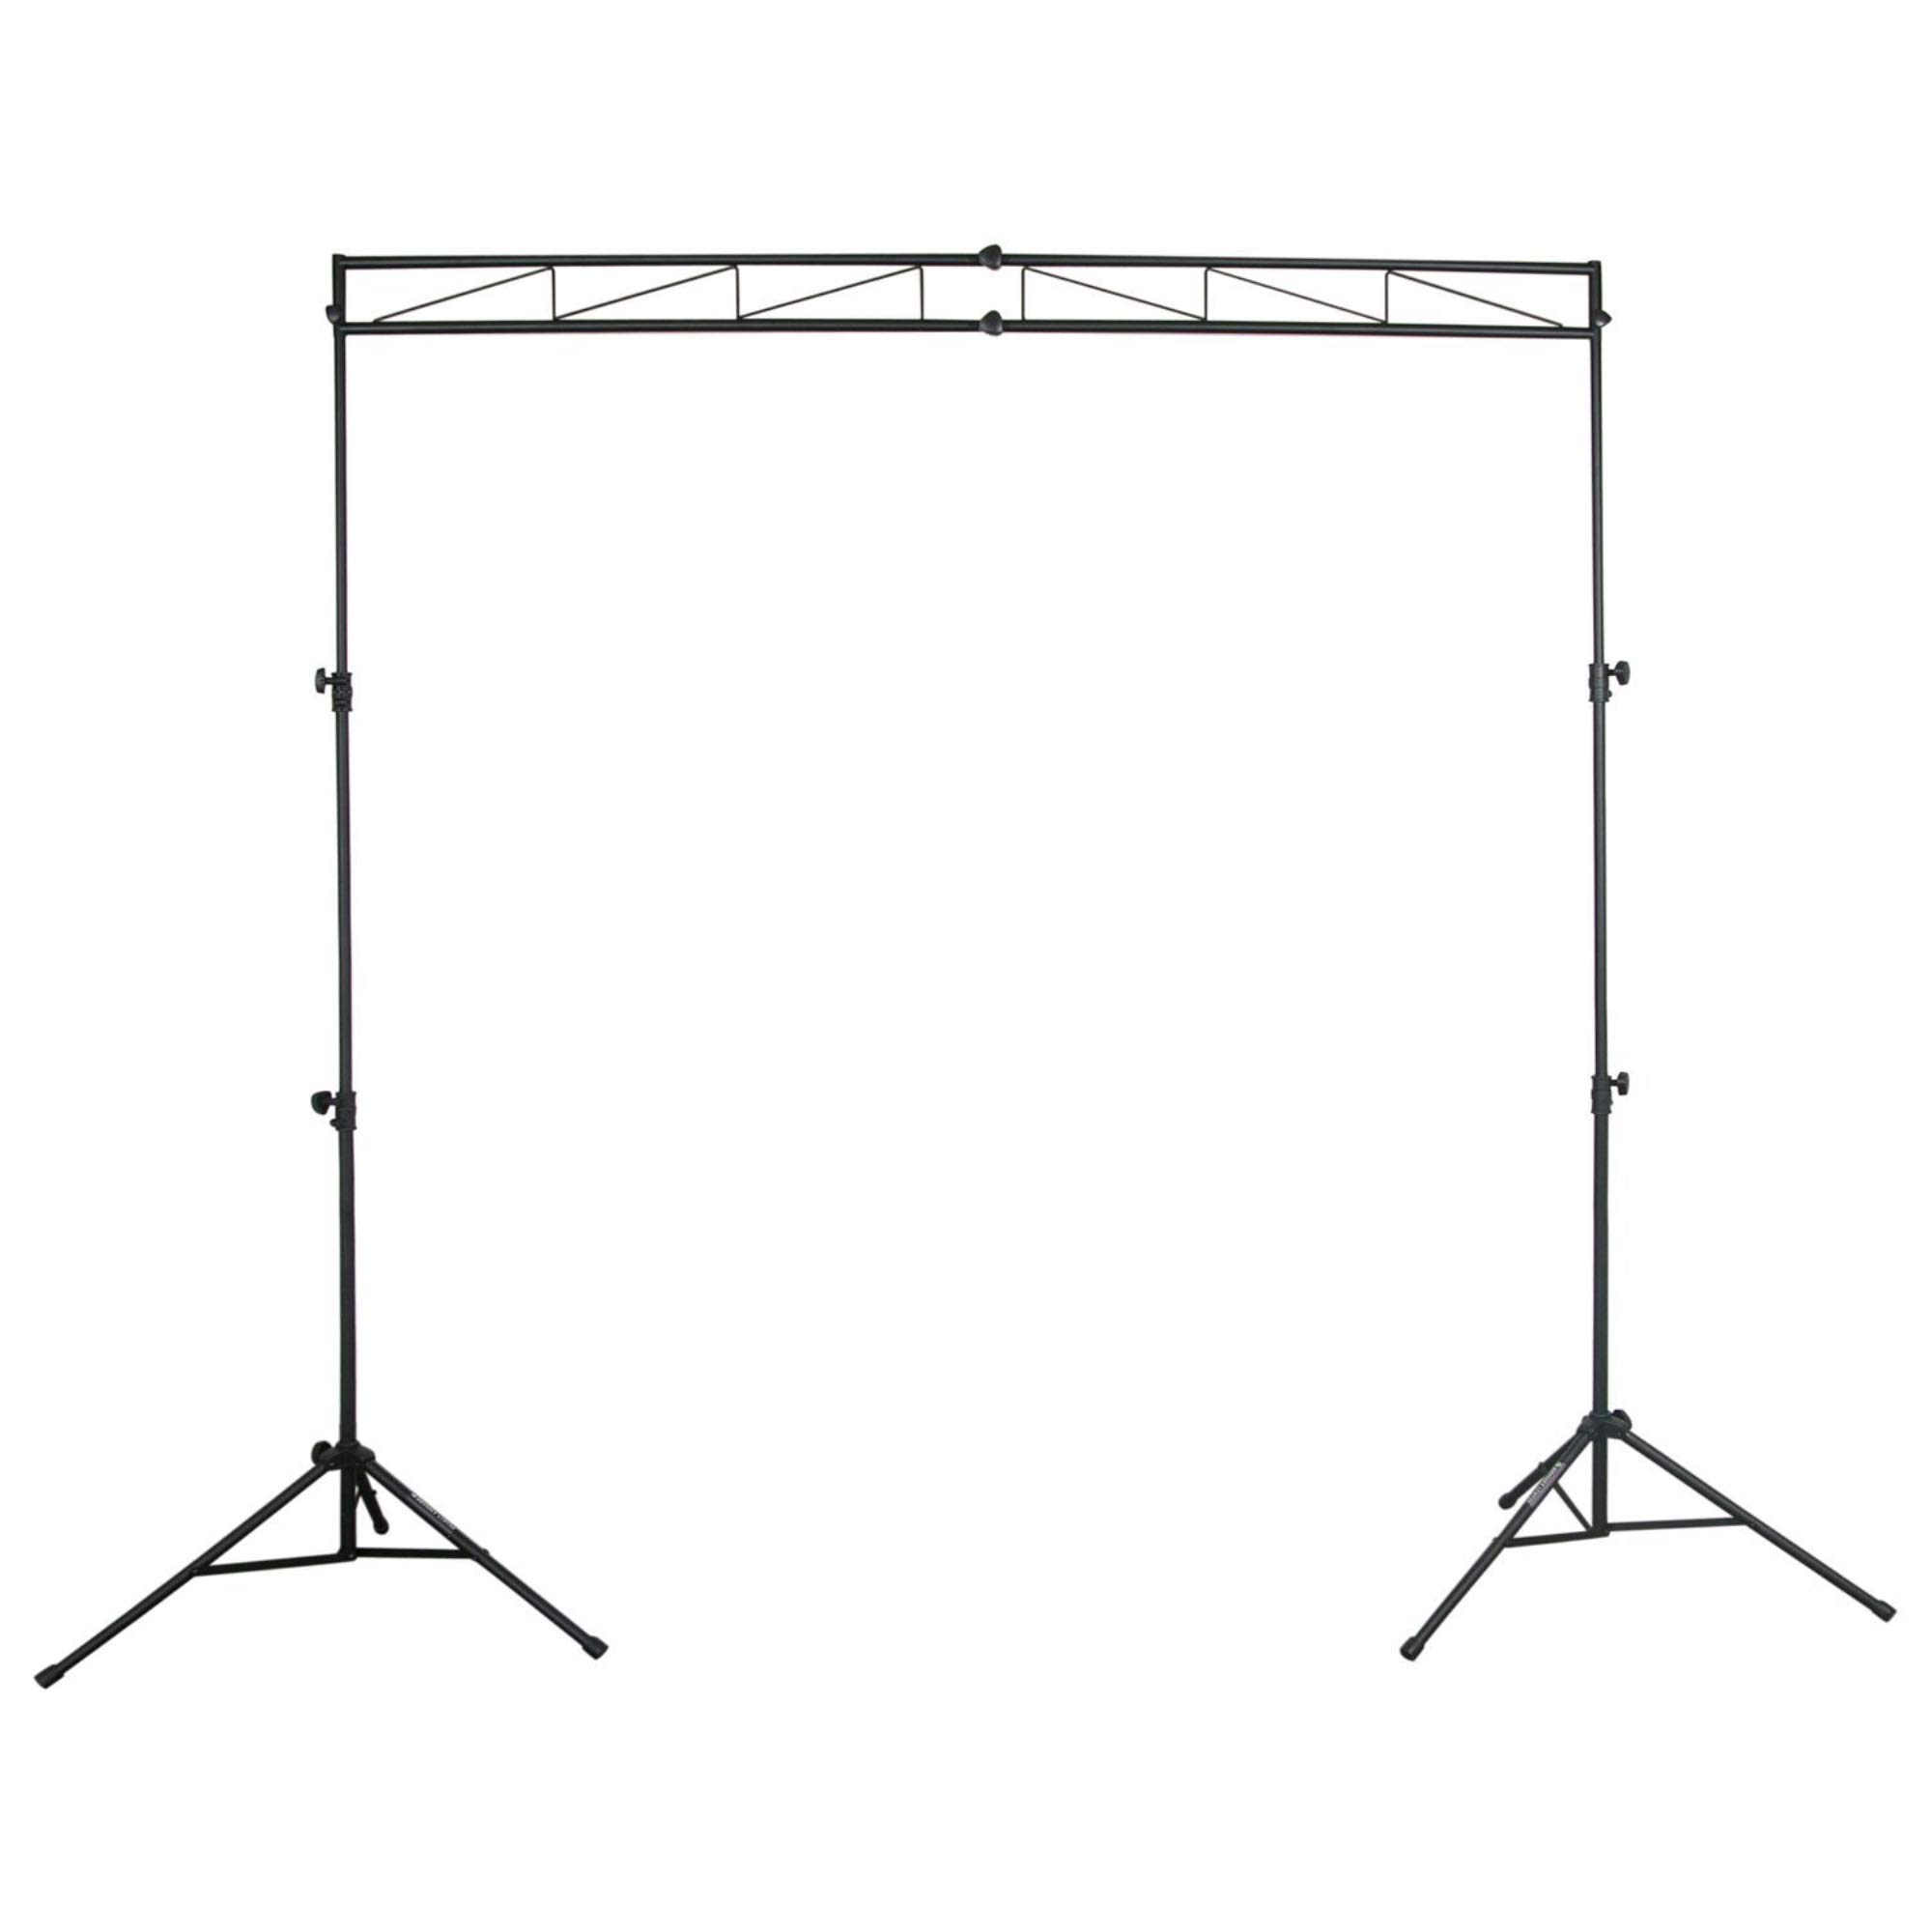 ODYSSEY Ltmts8 8 Feet Portable Mobile DJ Truss Kit Lighting Stand and Truss Package